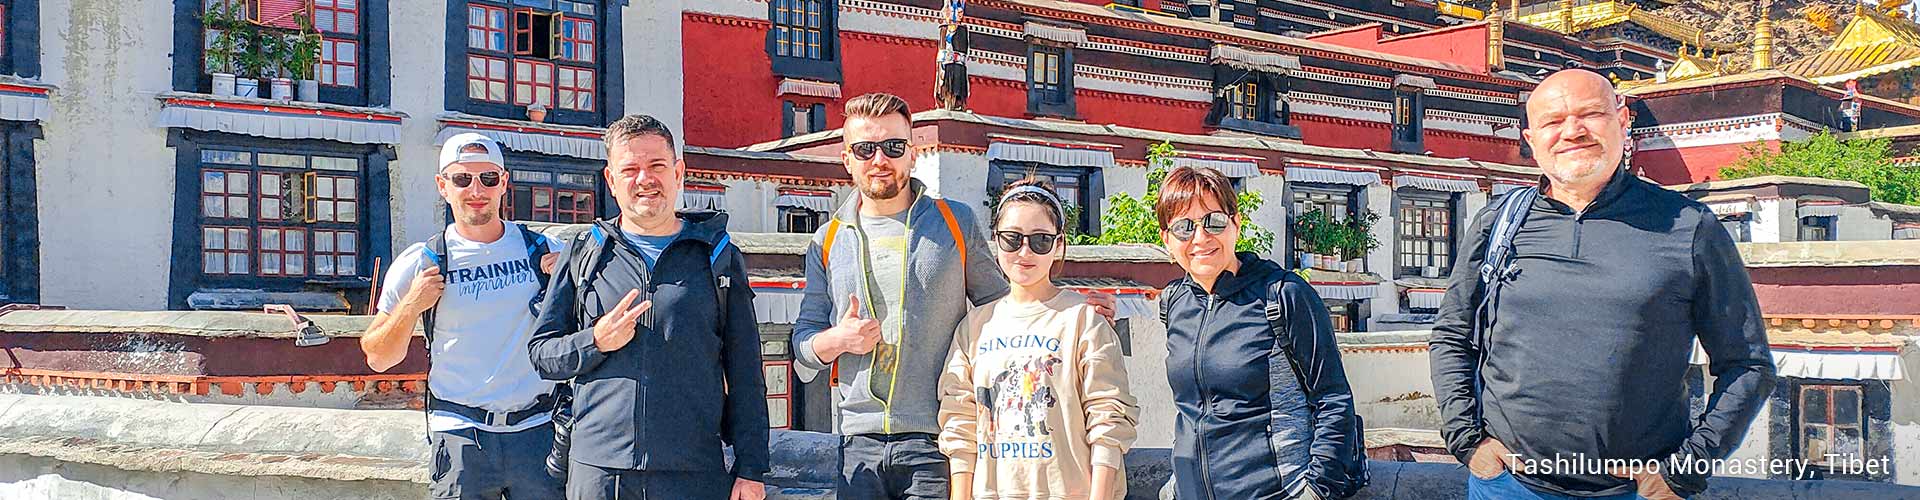 Get closer to the Tibetan Plateau with us. Join in Tibet Shigatse Tour to explore Tibetan culture and its nature wonders.